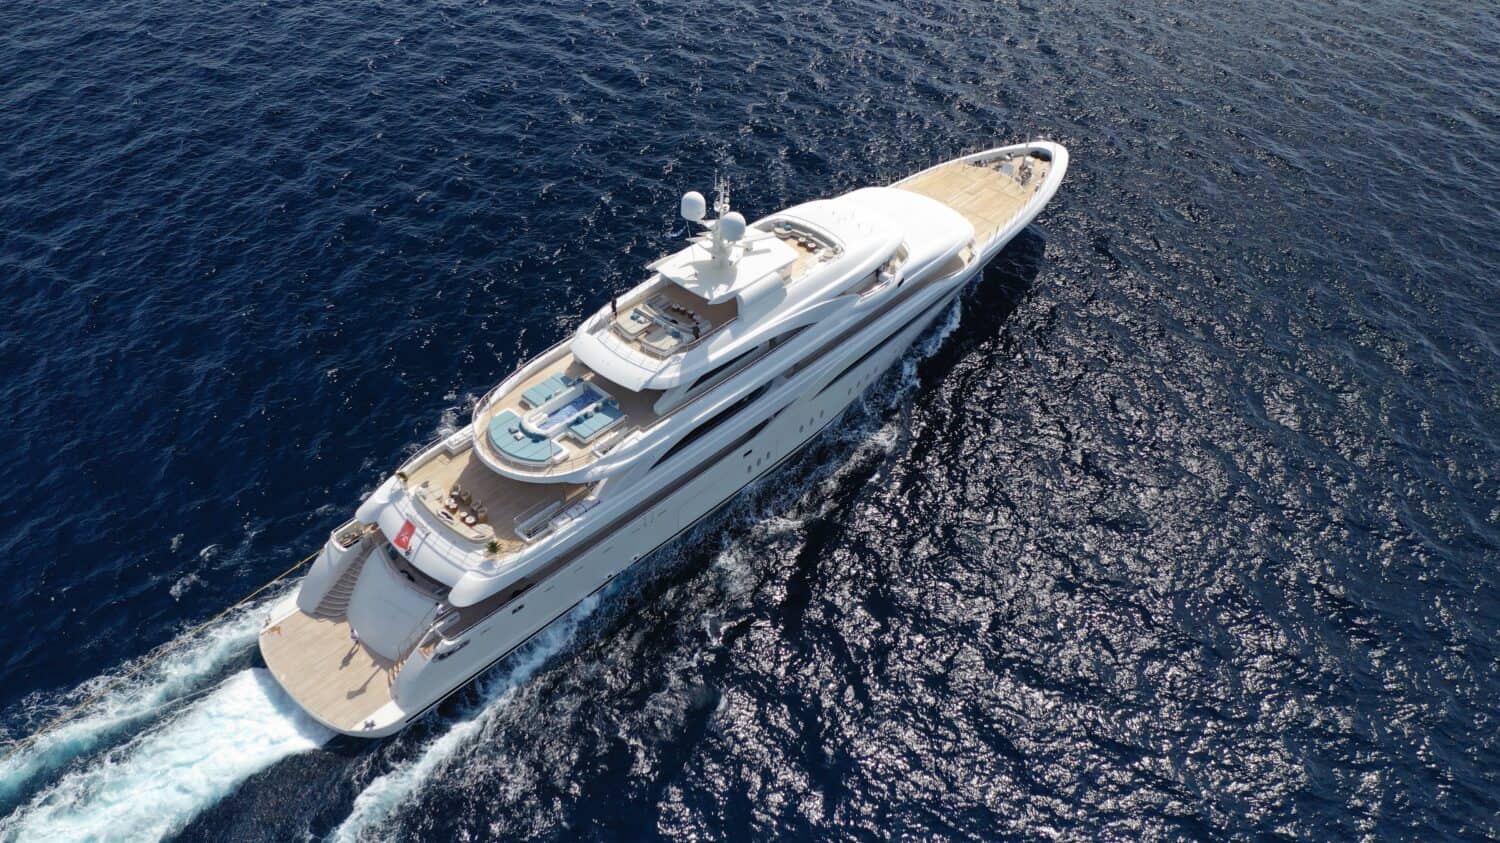 Aerial drone photo of beautiful modern super yacht with wooden deck cruising in high speed deep blue open ocean sea